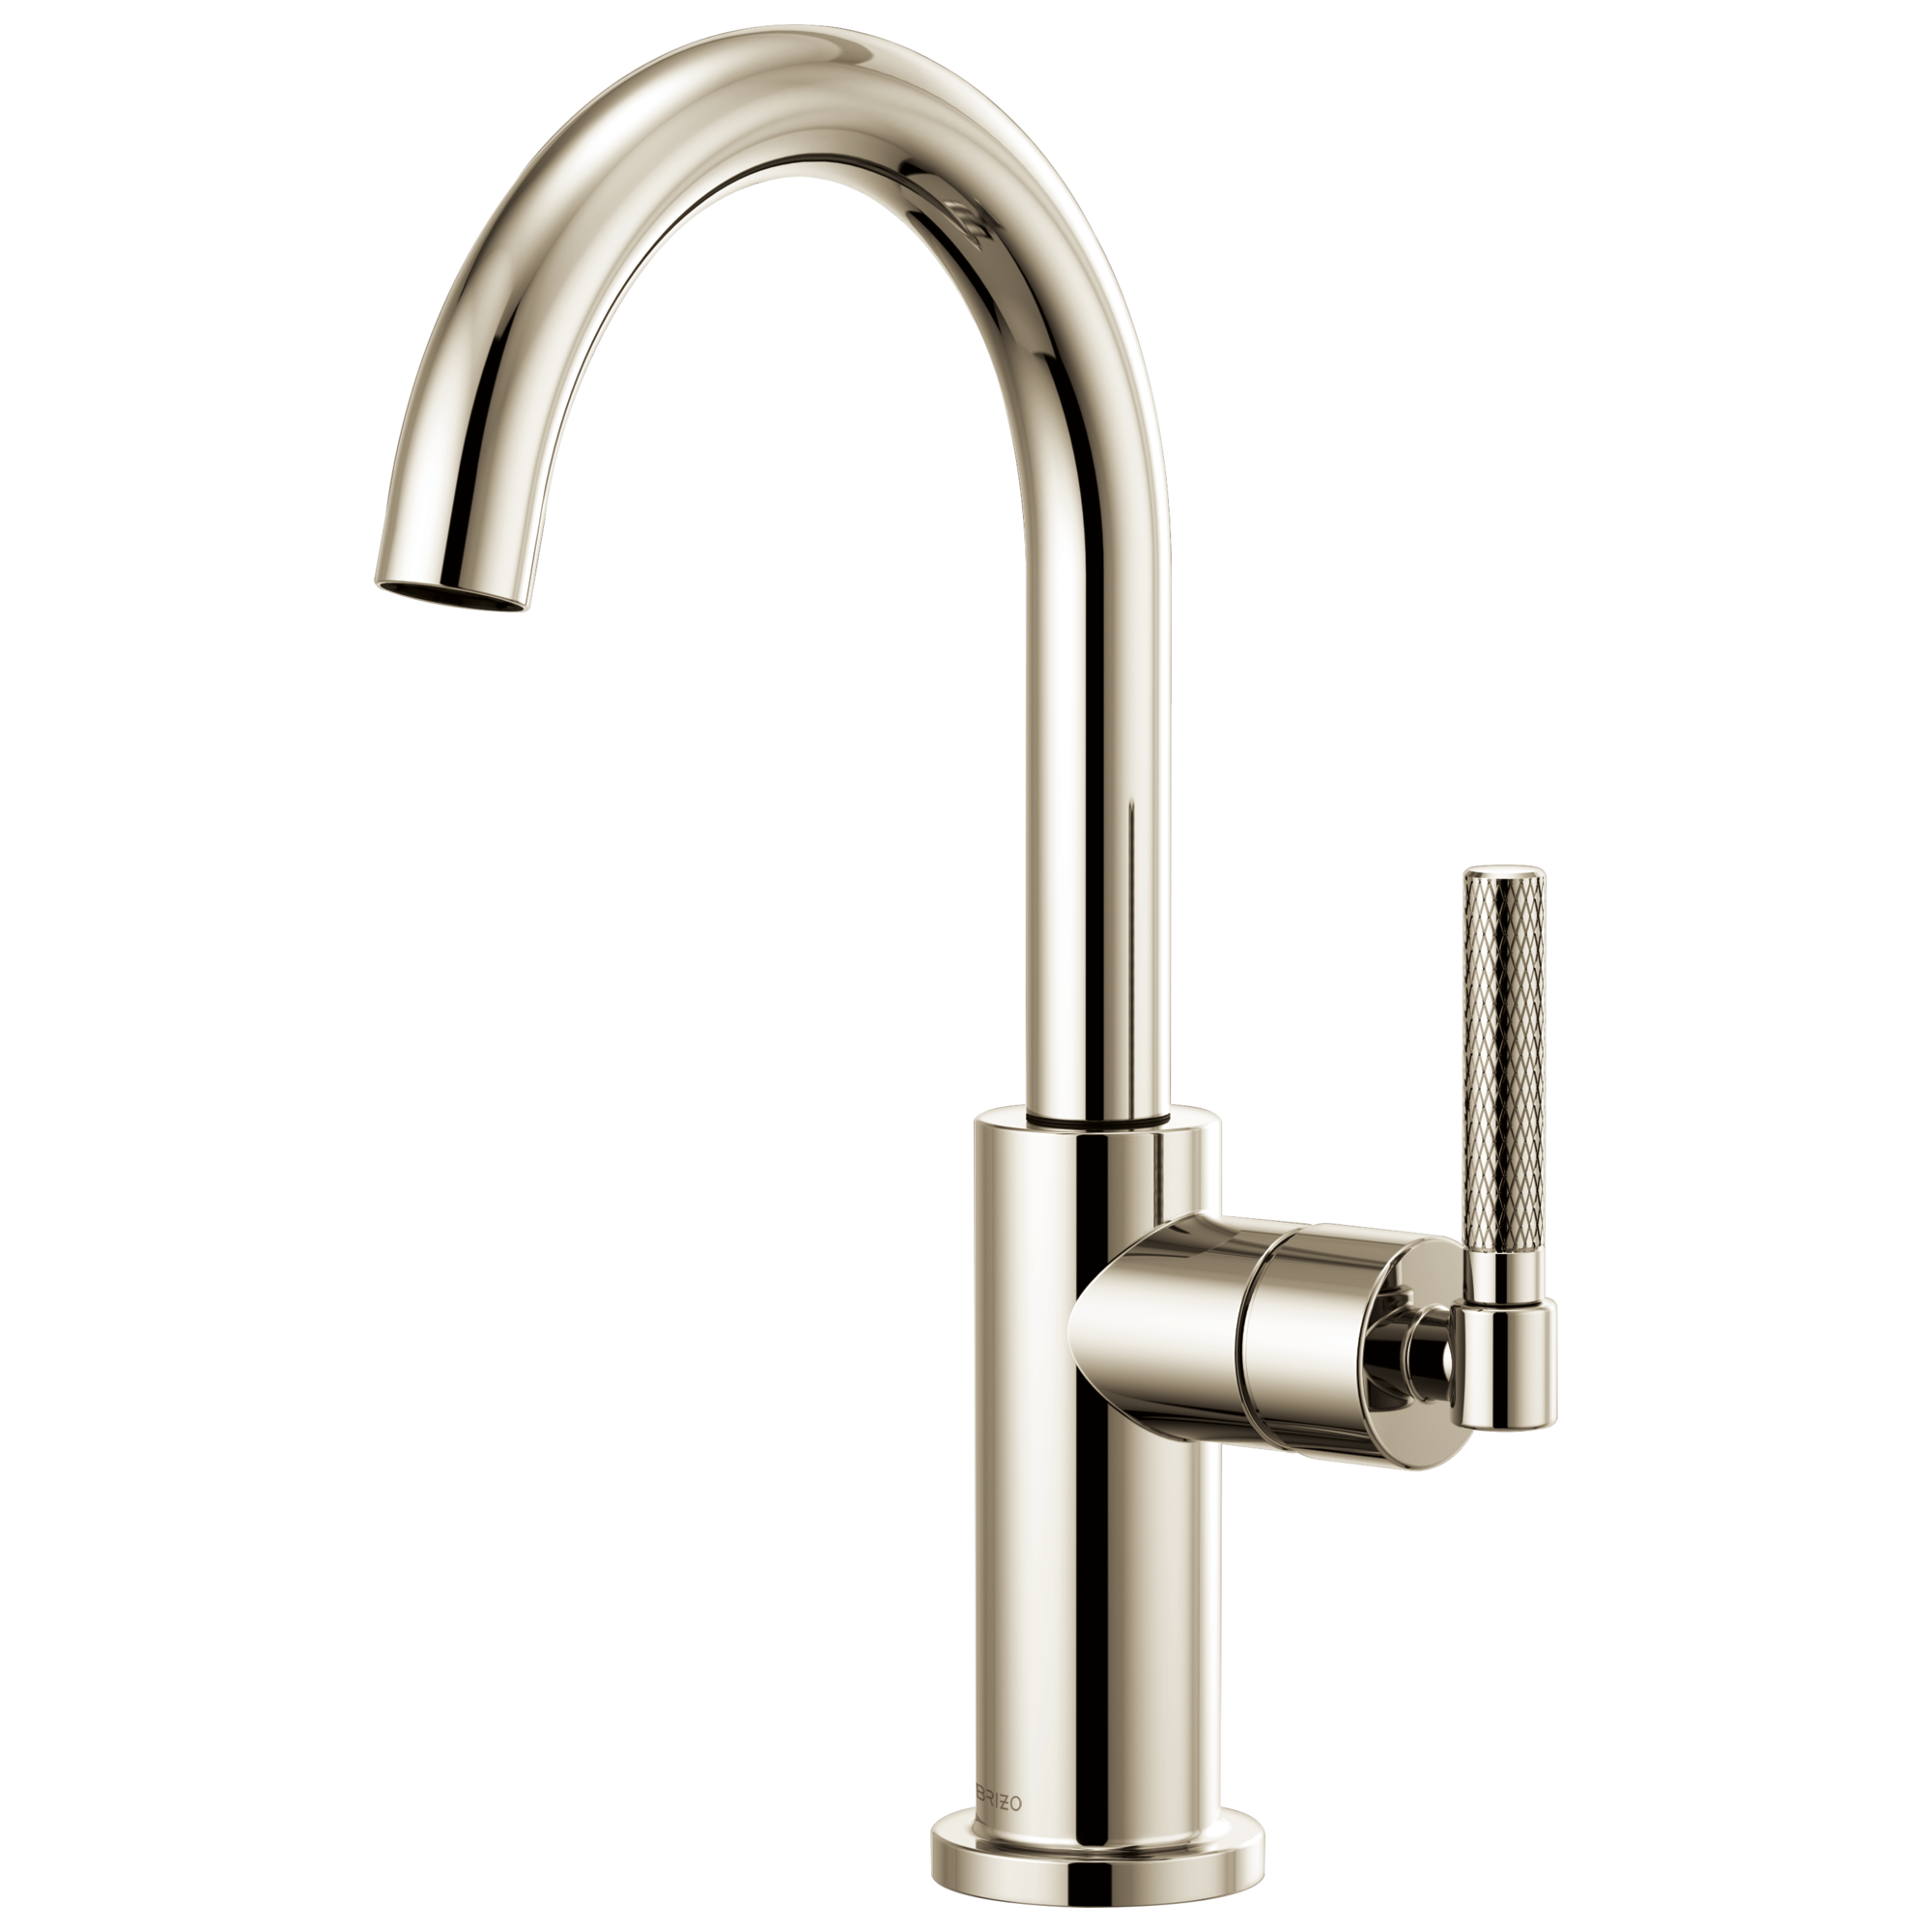 Brizo Litze Bar Faucet with Arc Spout and Knurled Handle Kit